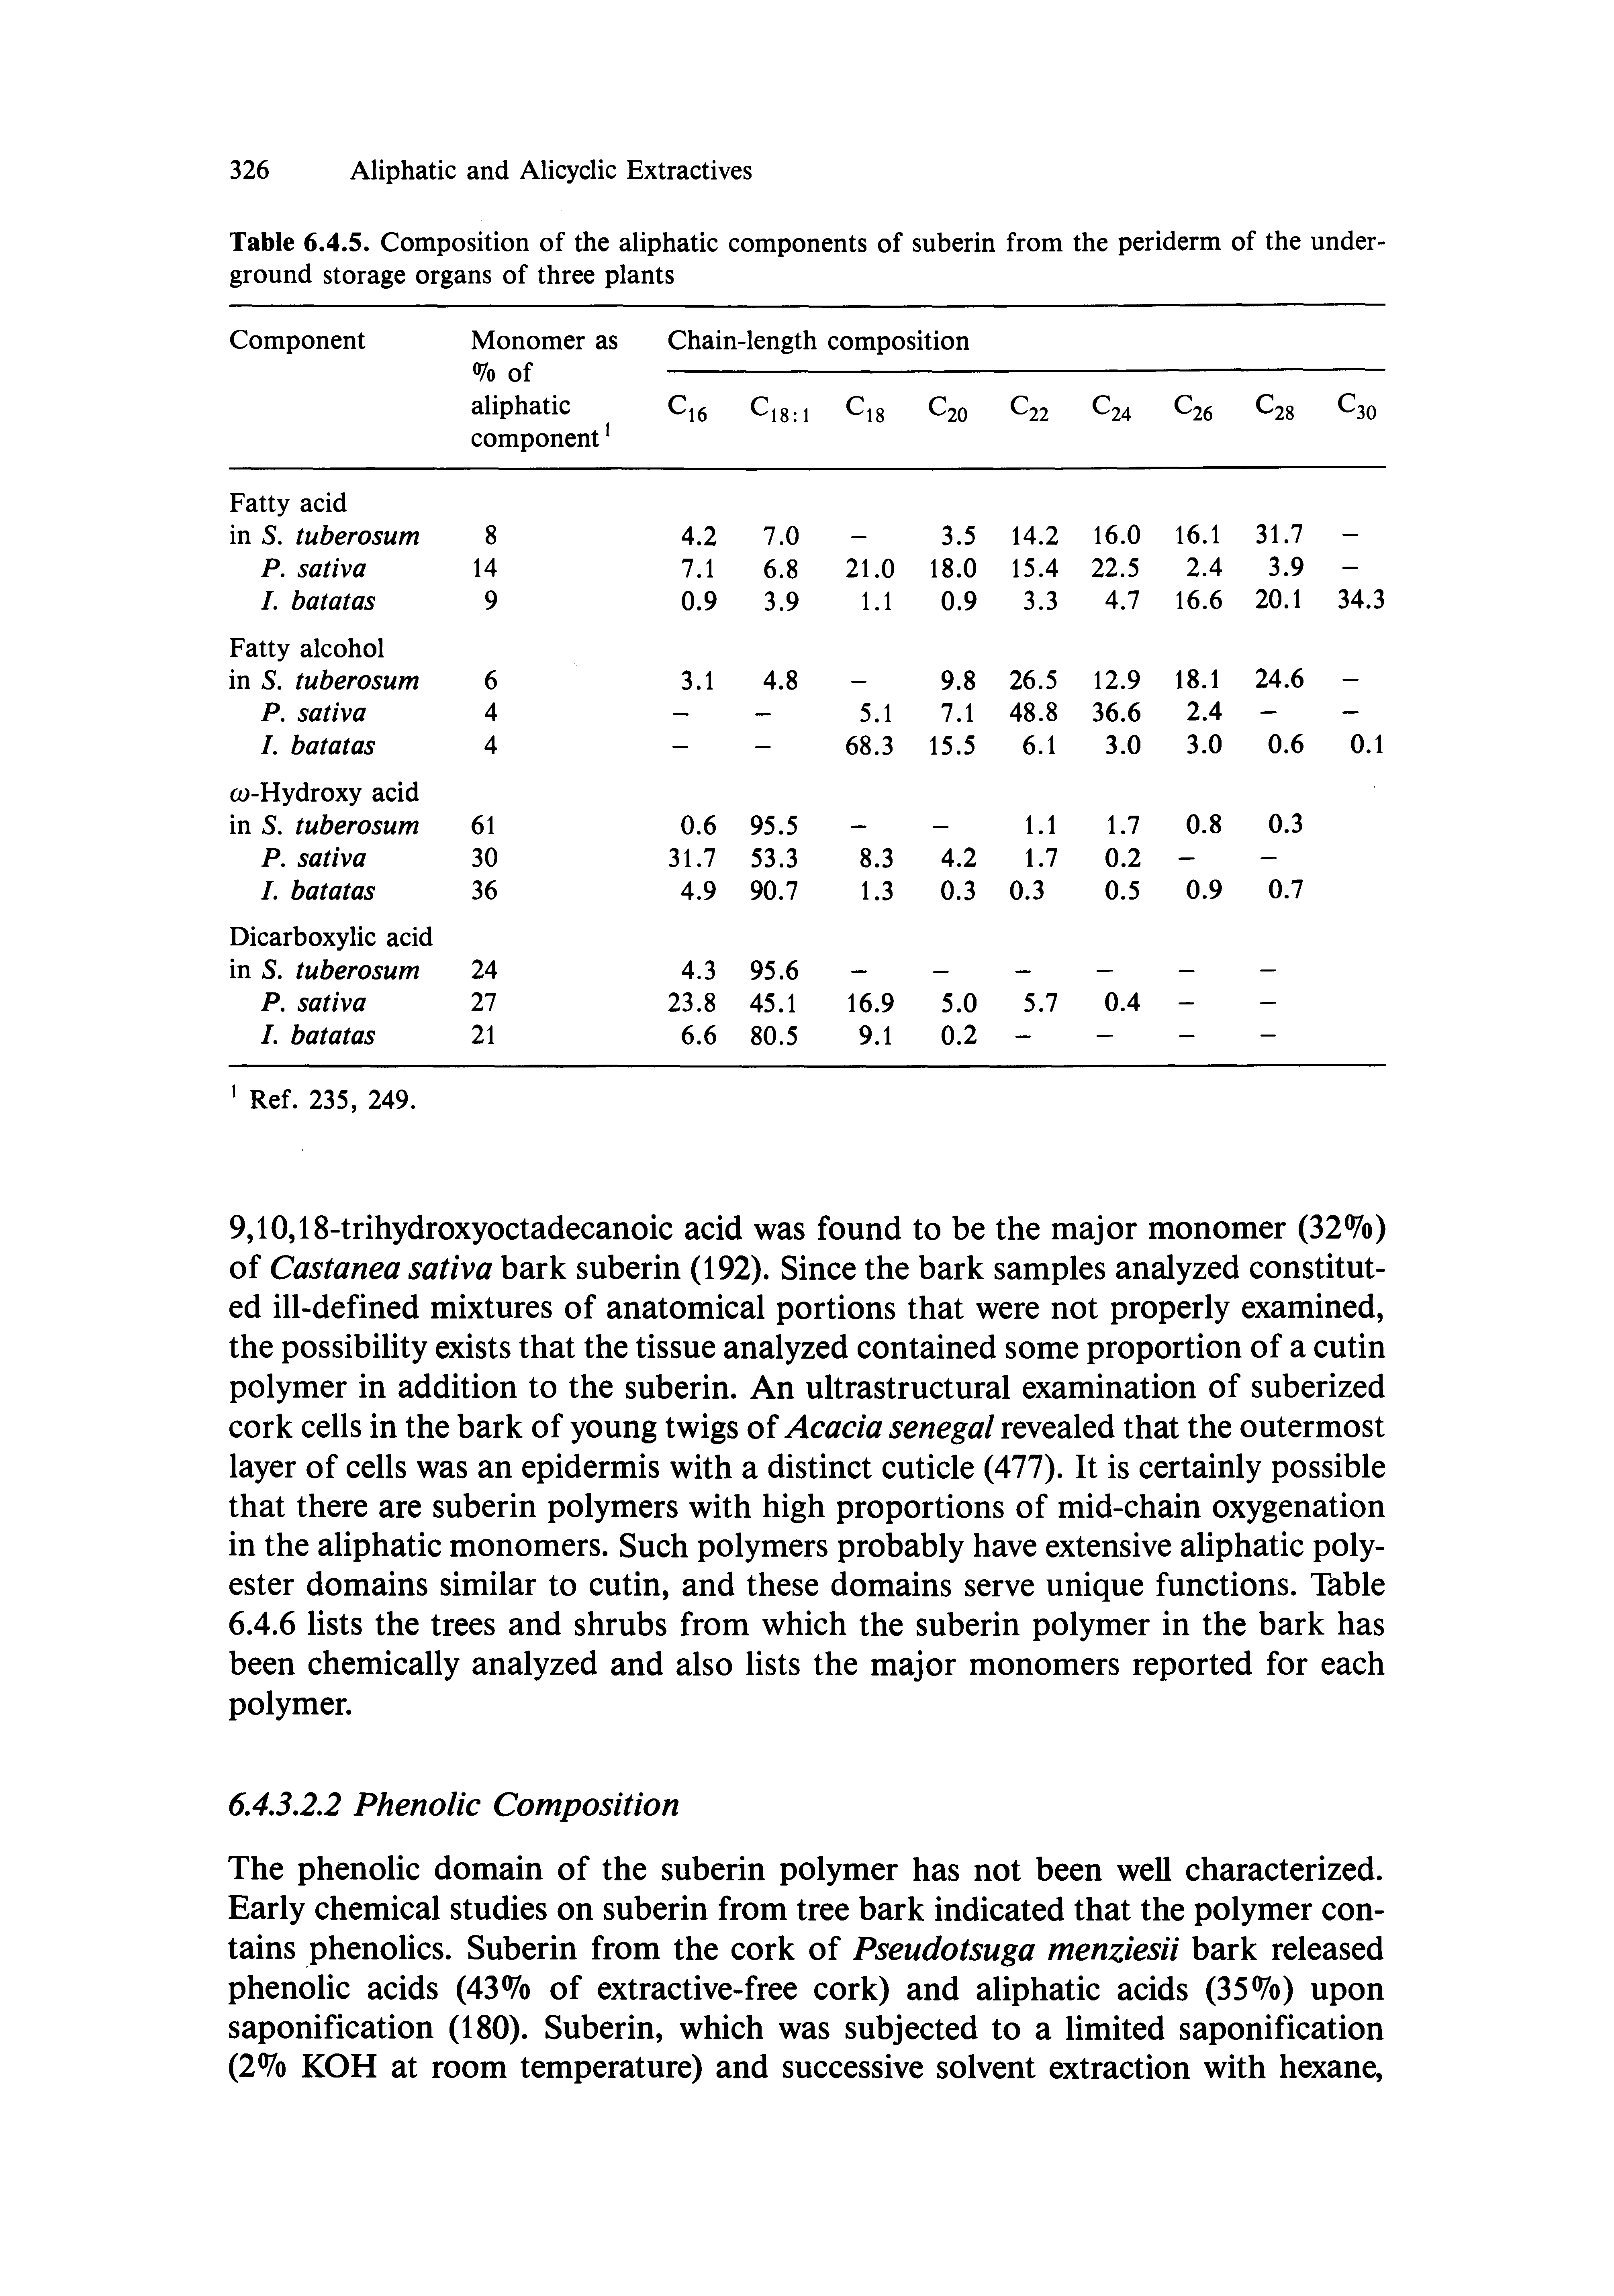 Table 6.4.5. Composition of the aliphatic components of suberin from the periderm of the underground storage organs of three plants...